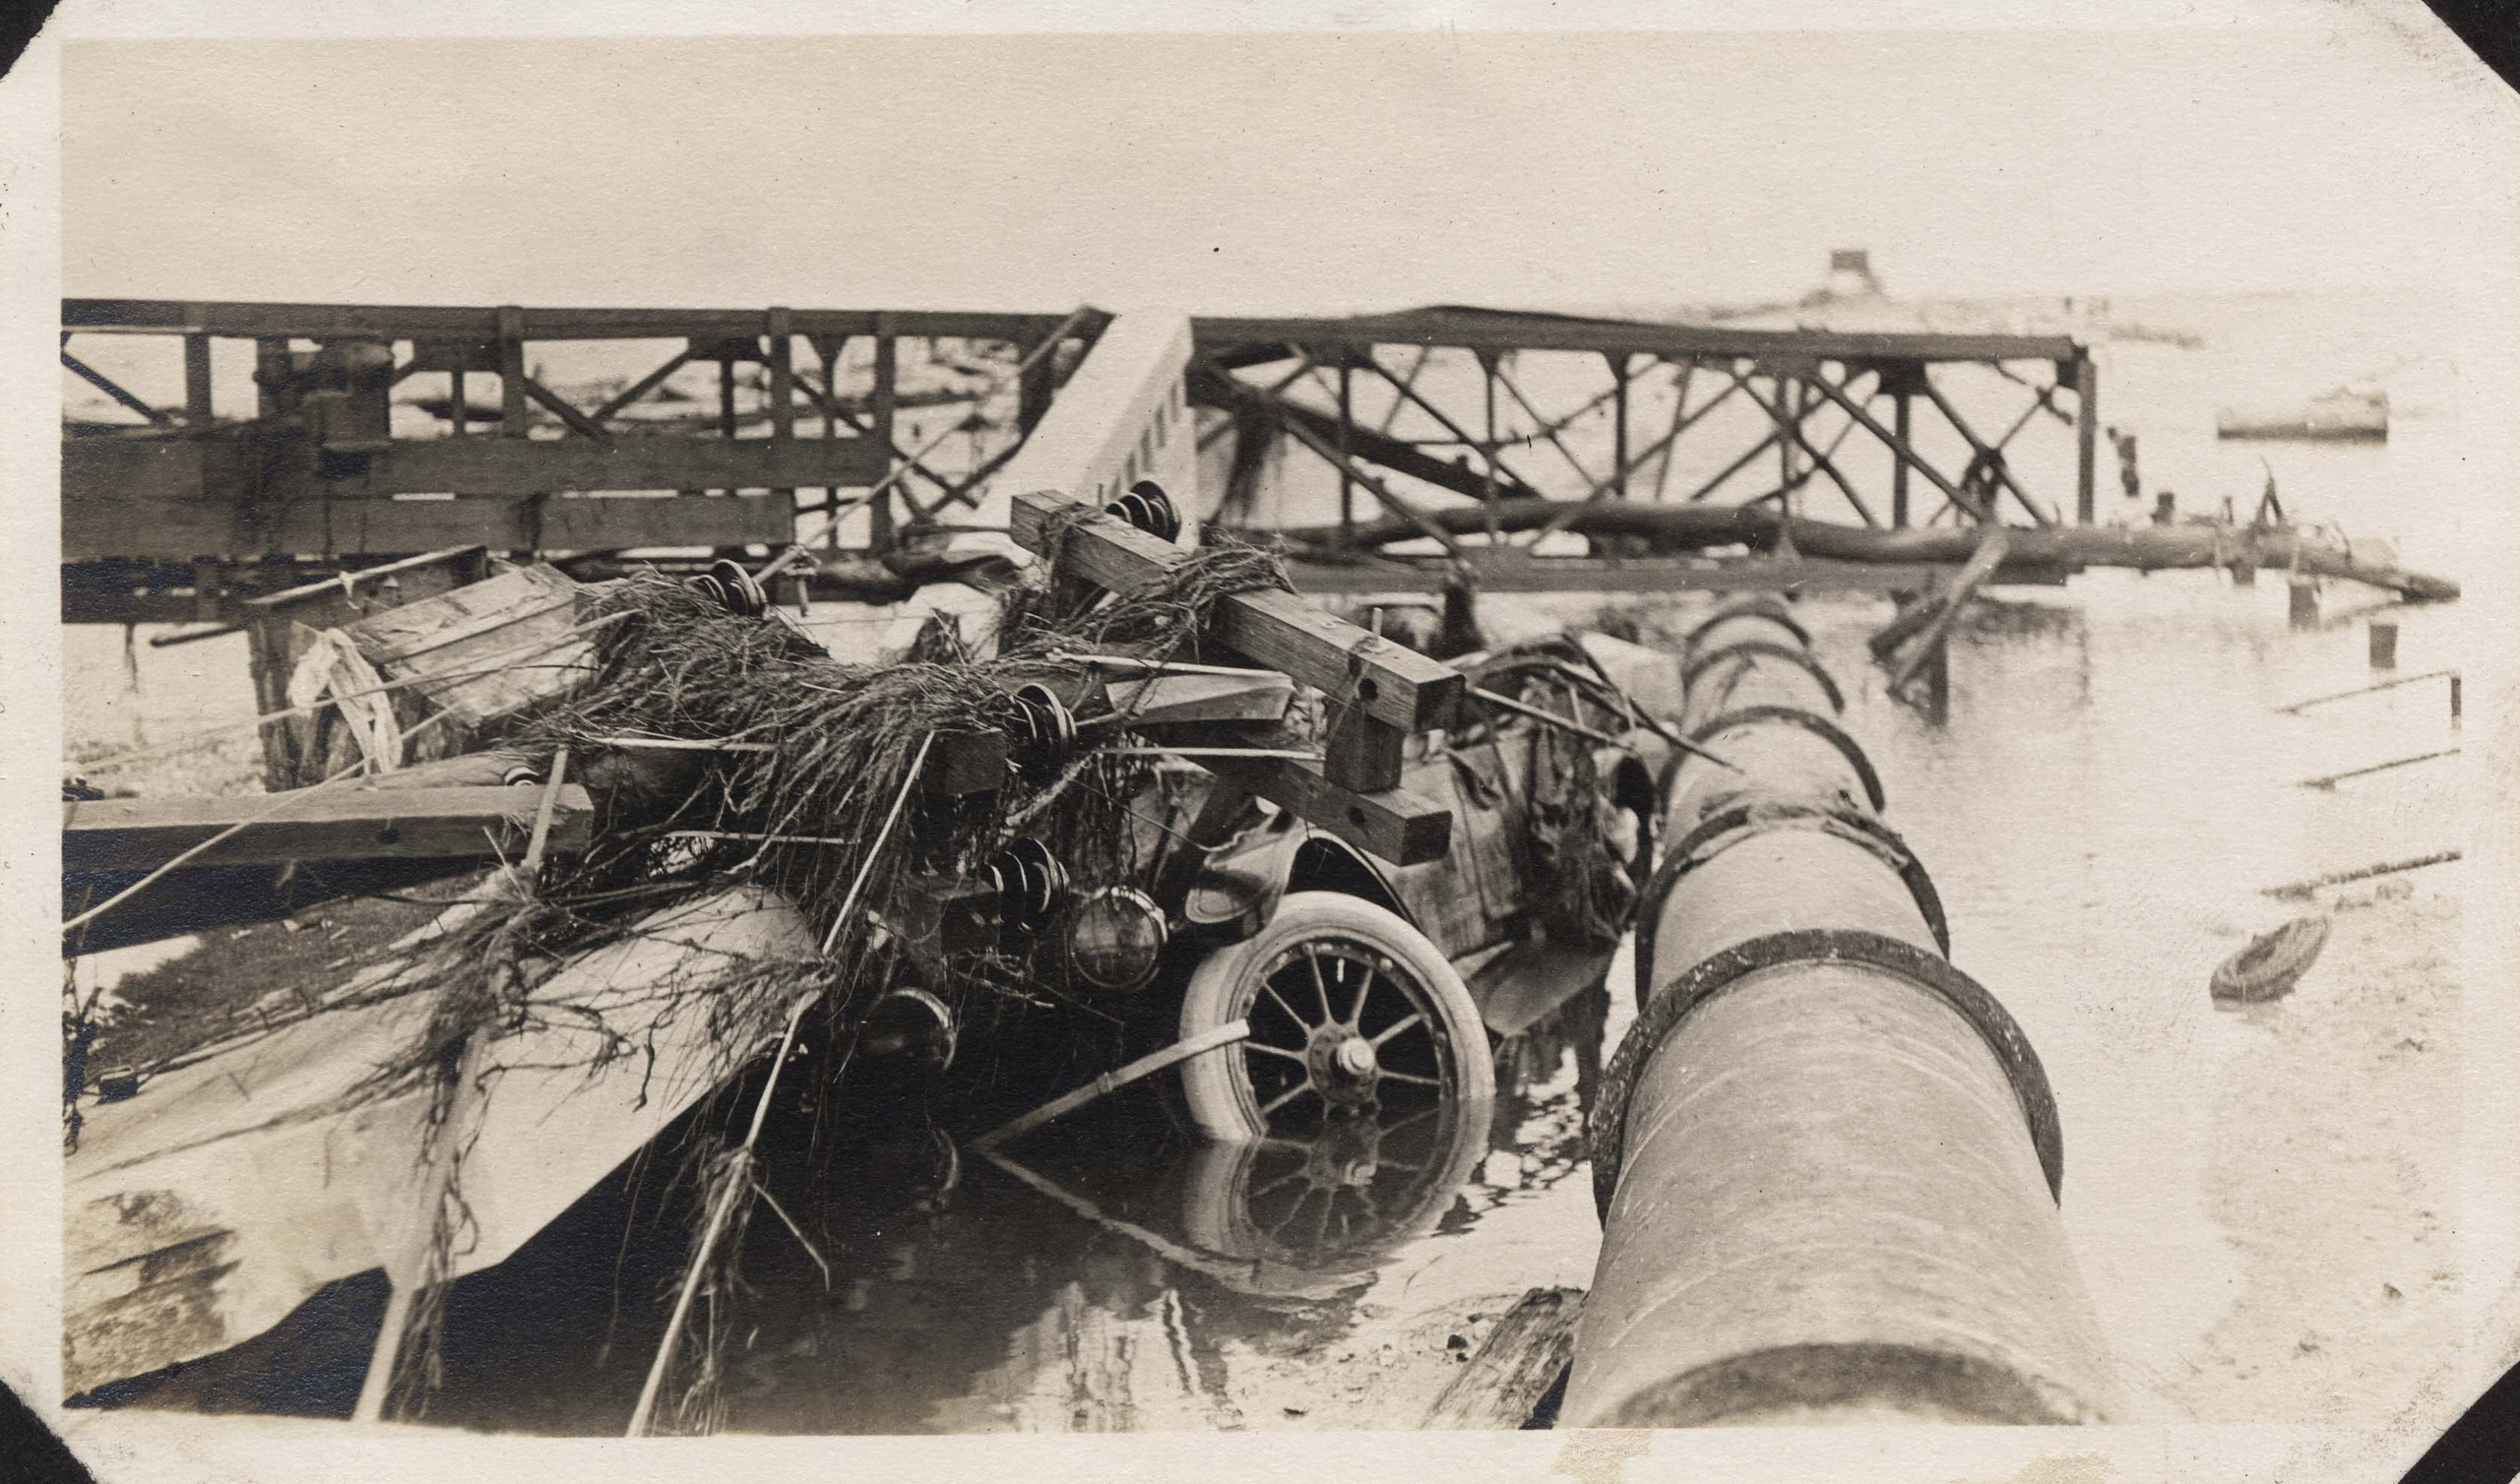 Wrecked semaphore bridge, pipe, poles. Car caught on Causeway during collapse (occupants made it to VA Pt. signal tower and survived).